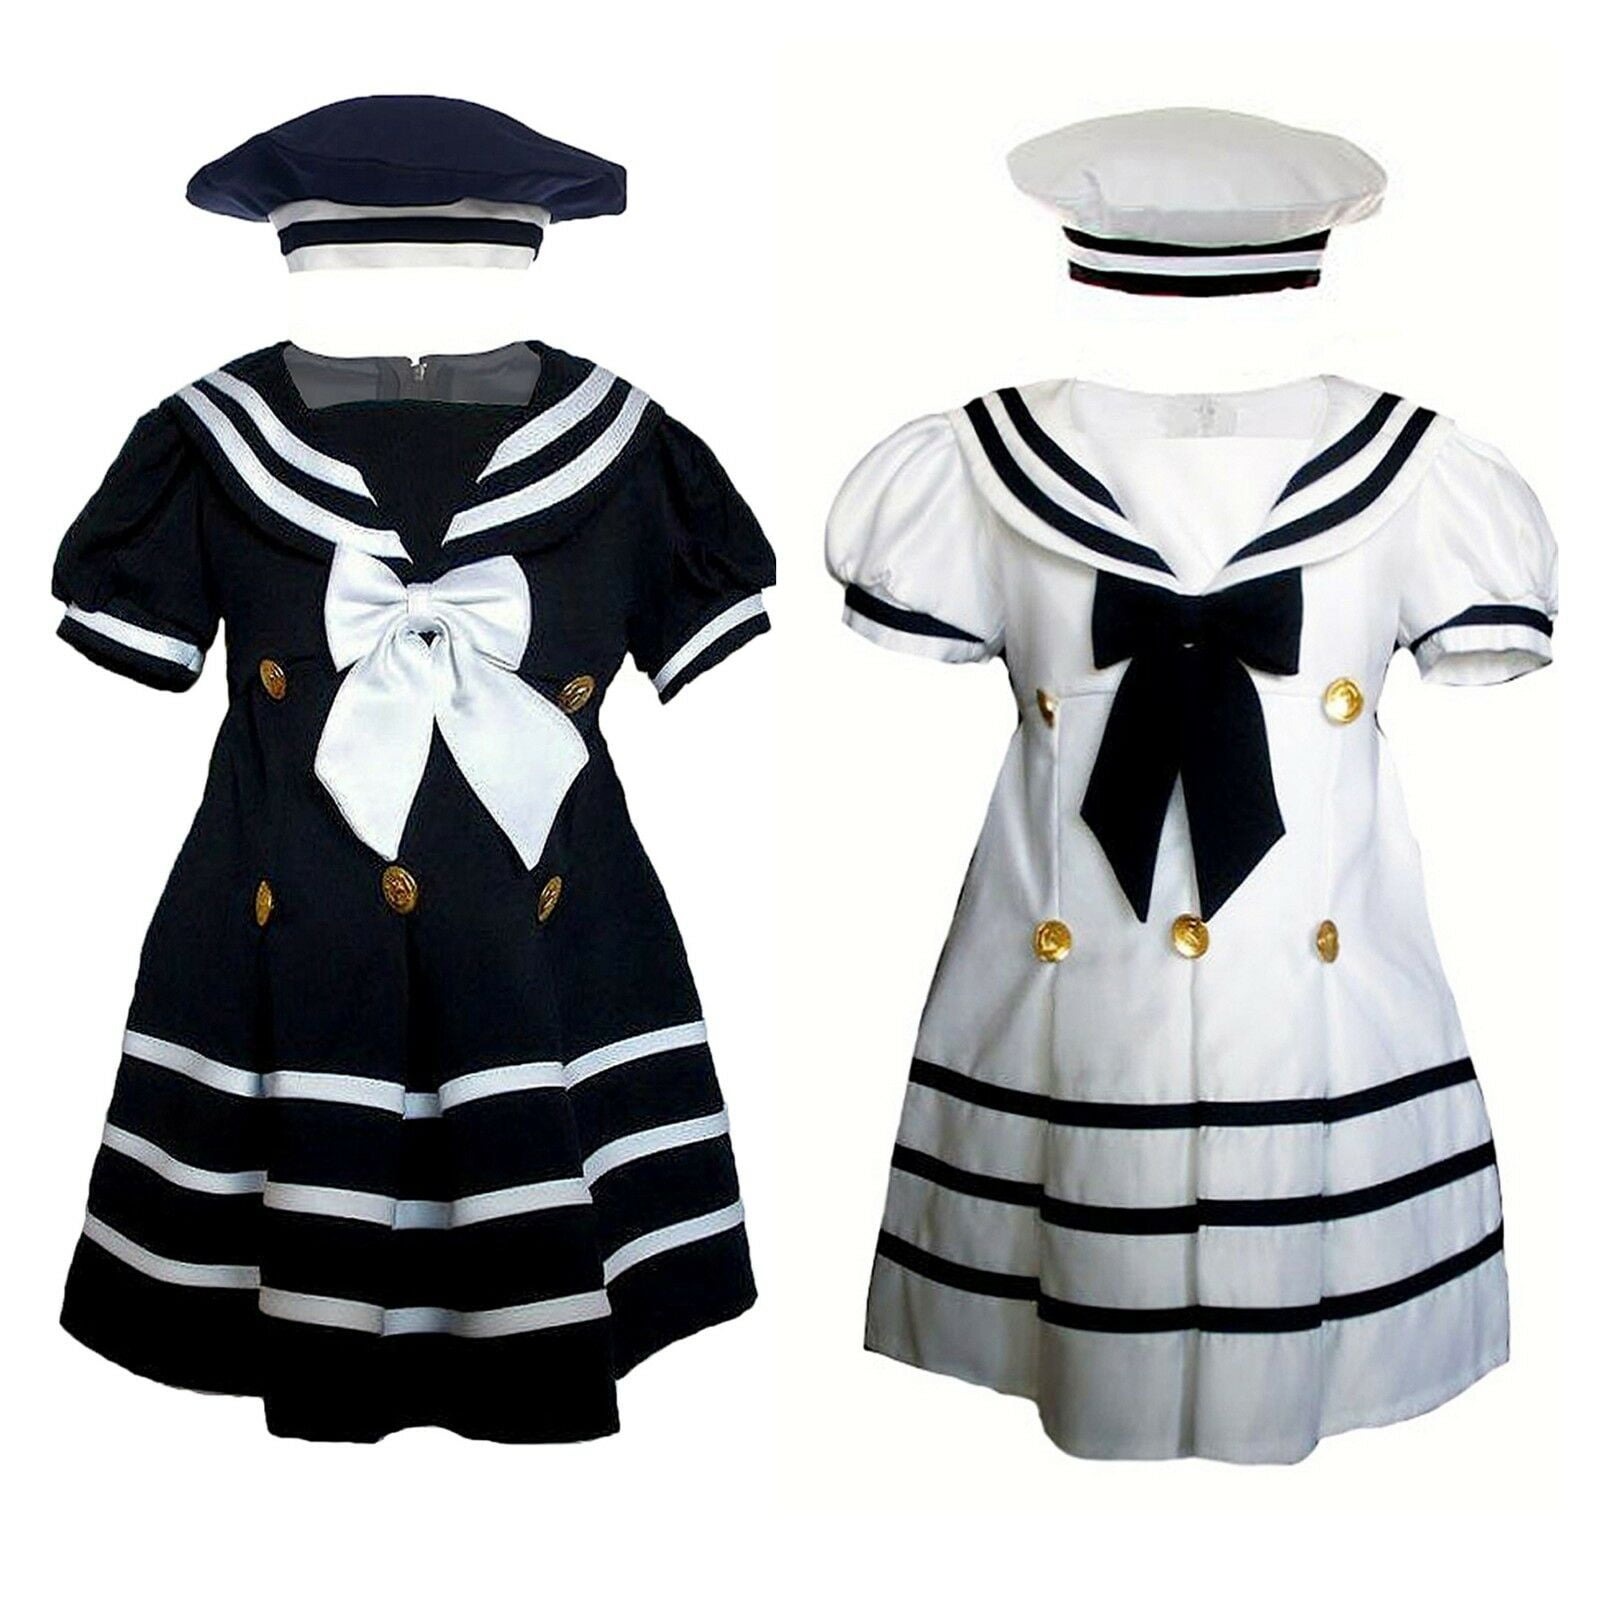 Navy Blue or White  Small to 4T Infant Toddler Girls Sailor dress 